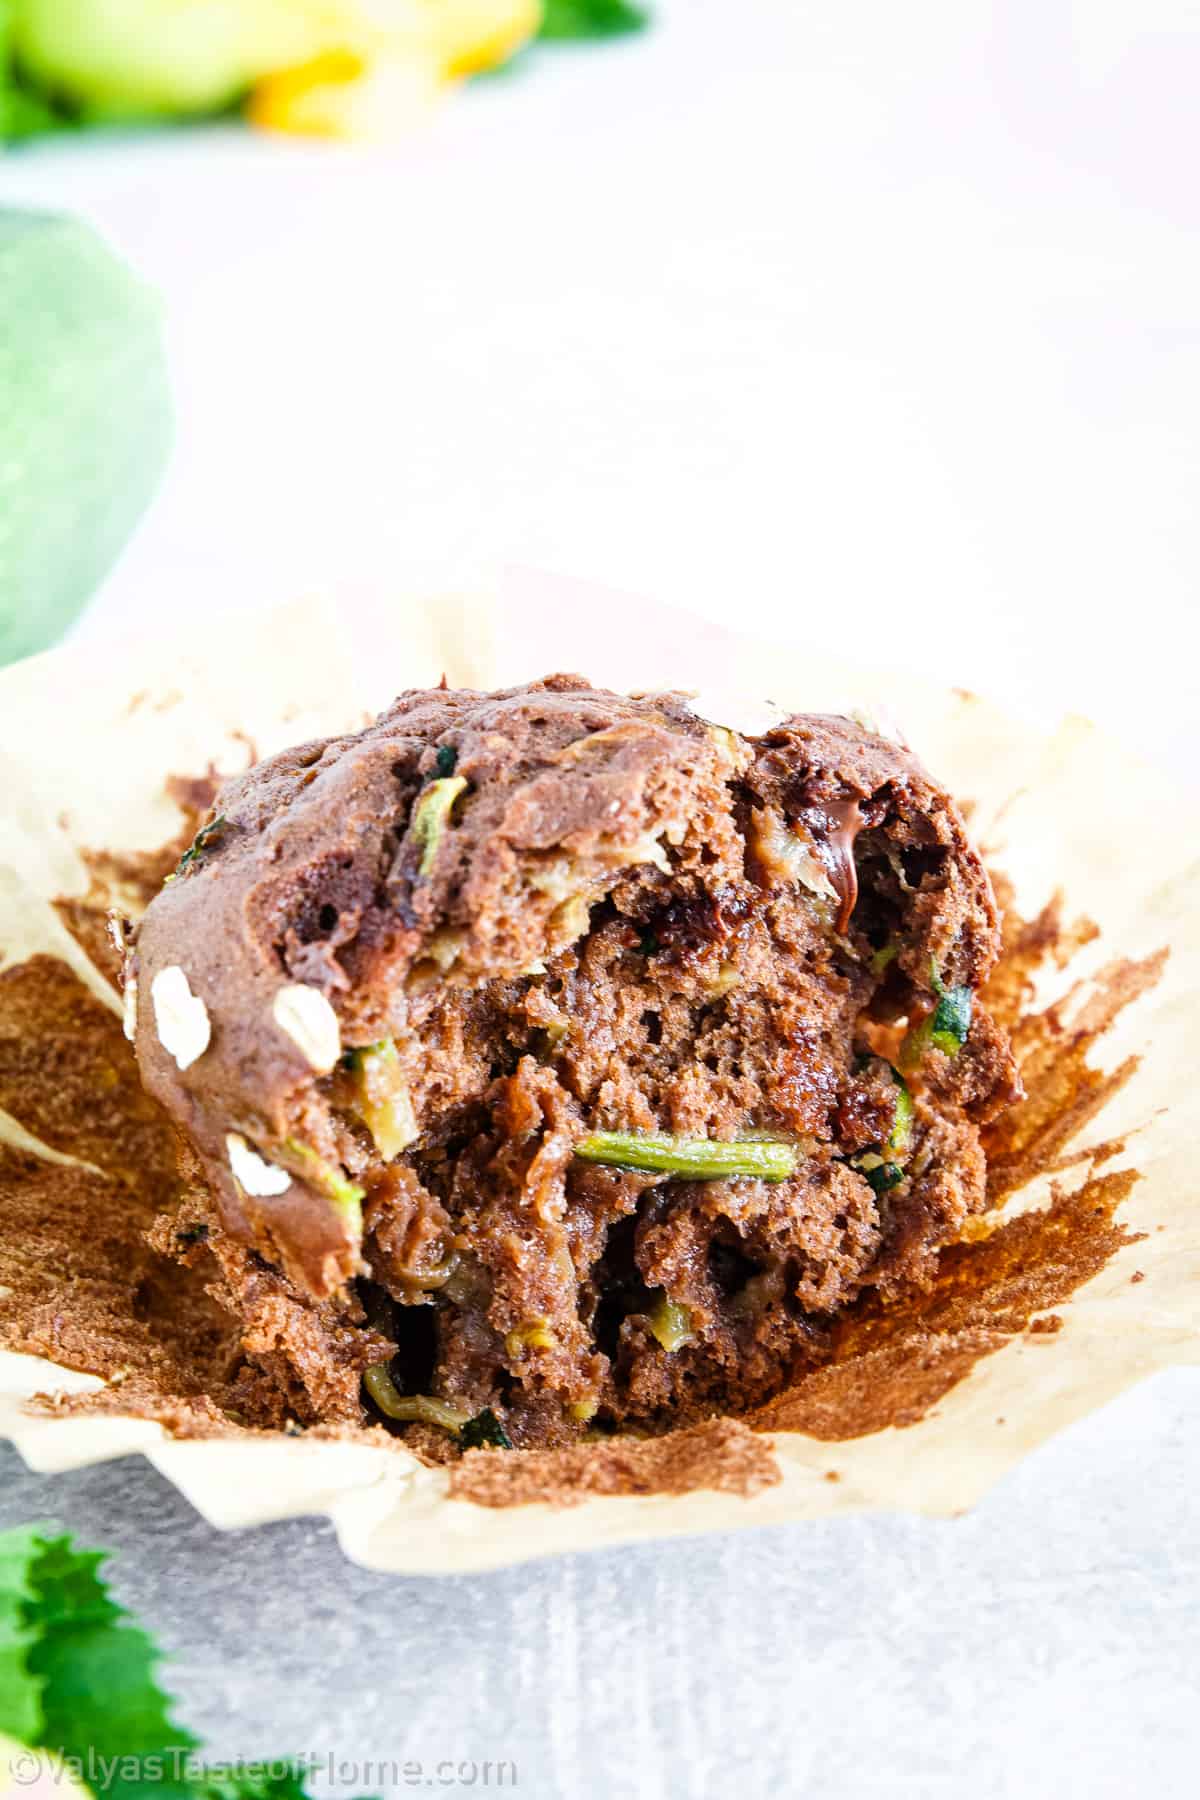 These muffins are a seriously delicious and nutritious treat that can be enjoyed for breakfast, as a snack, or even as a dessert. 